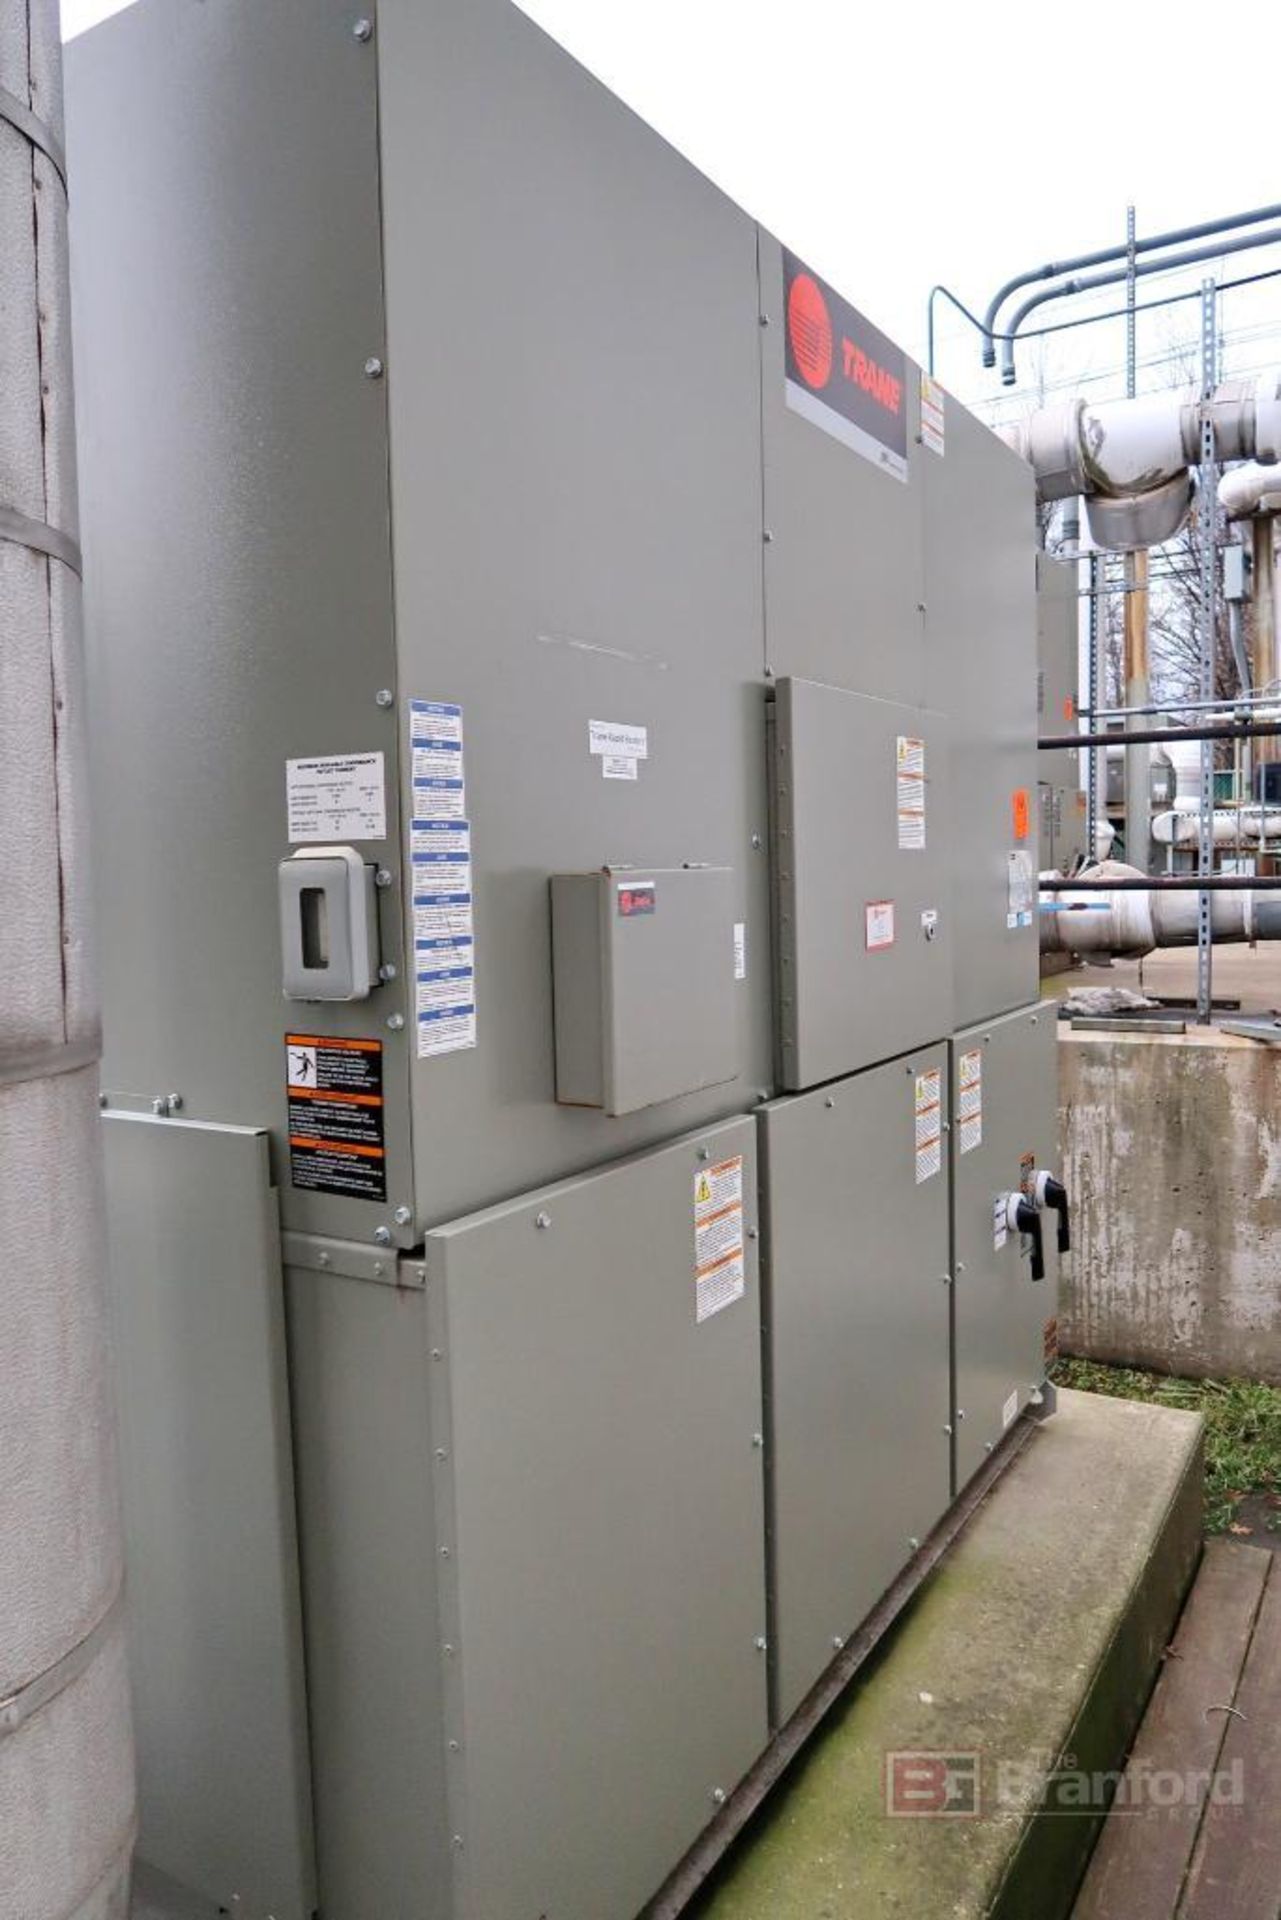 Trane 250-Ton Air Cooled Chiller - Image 8 of 9